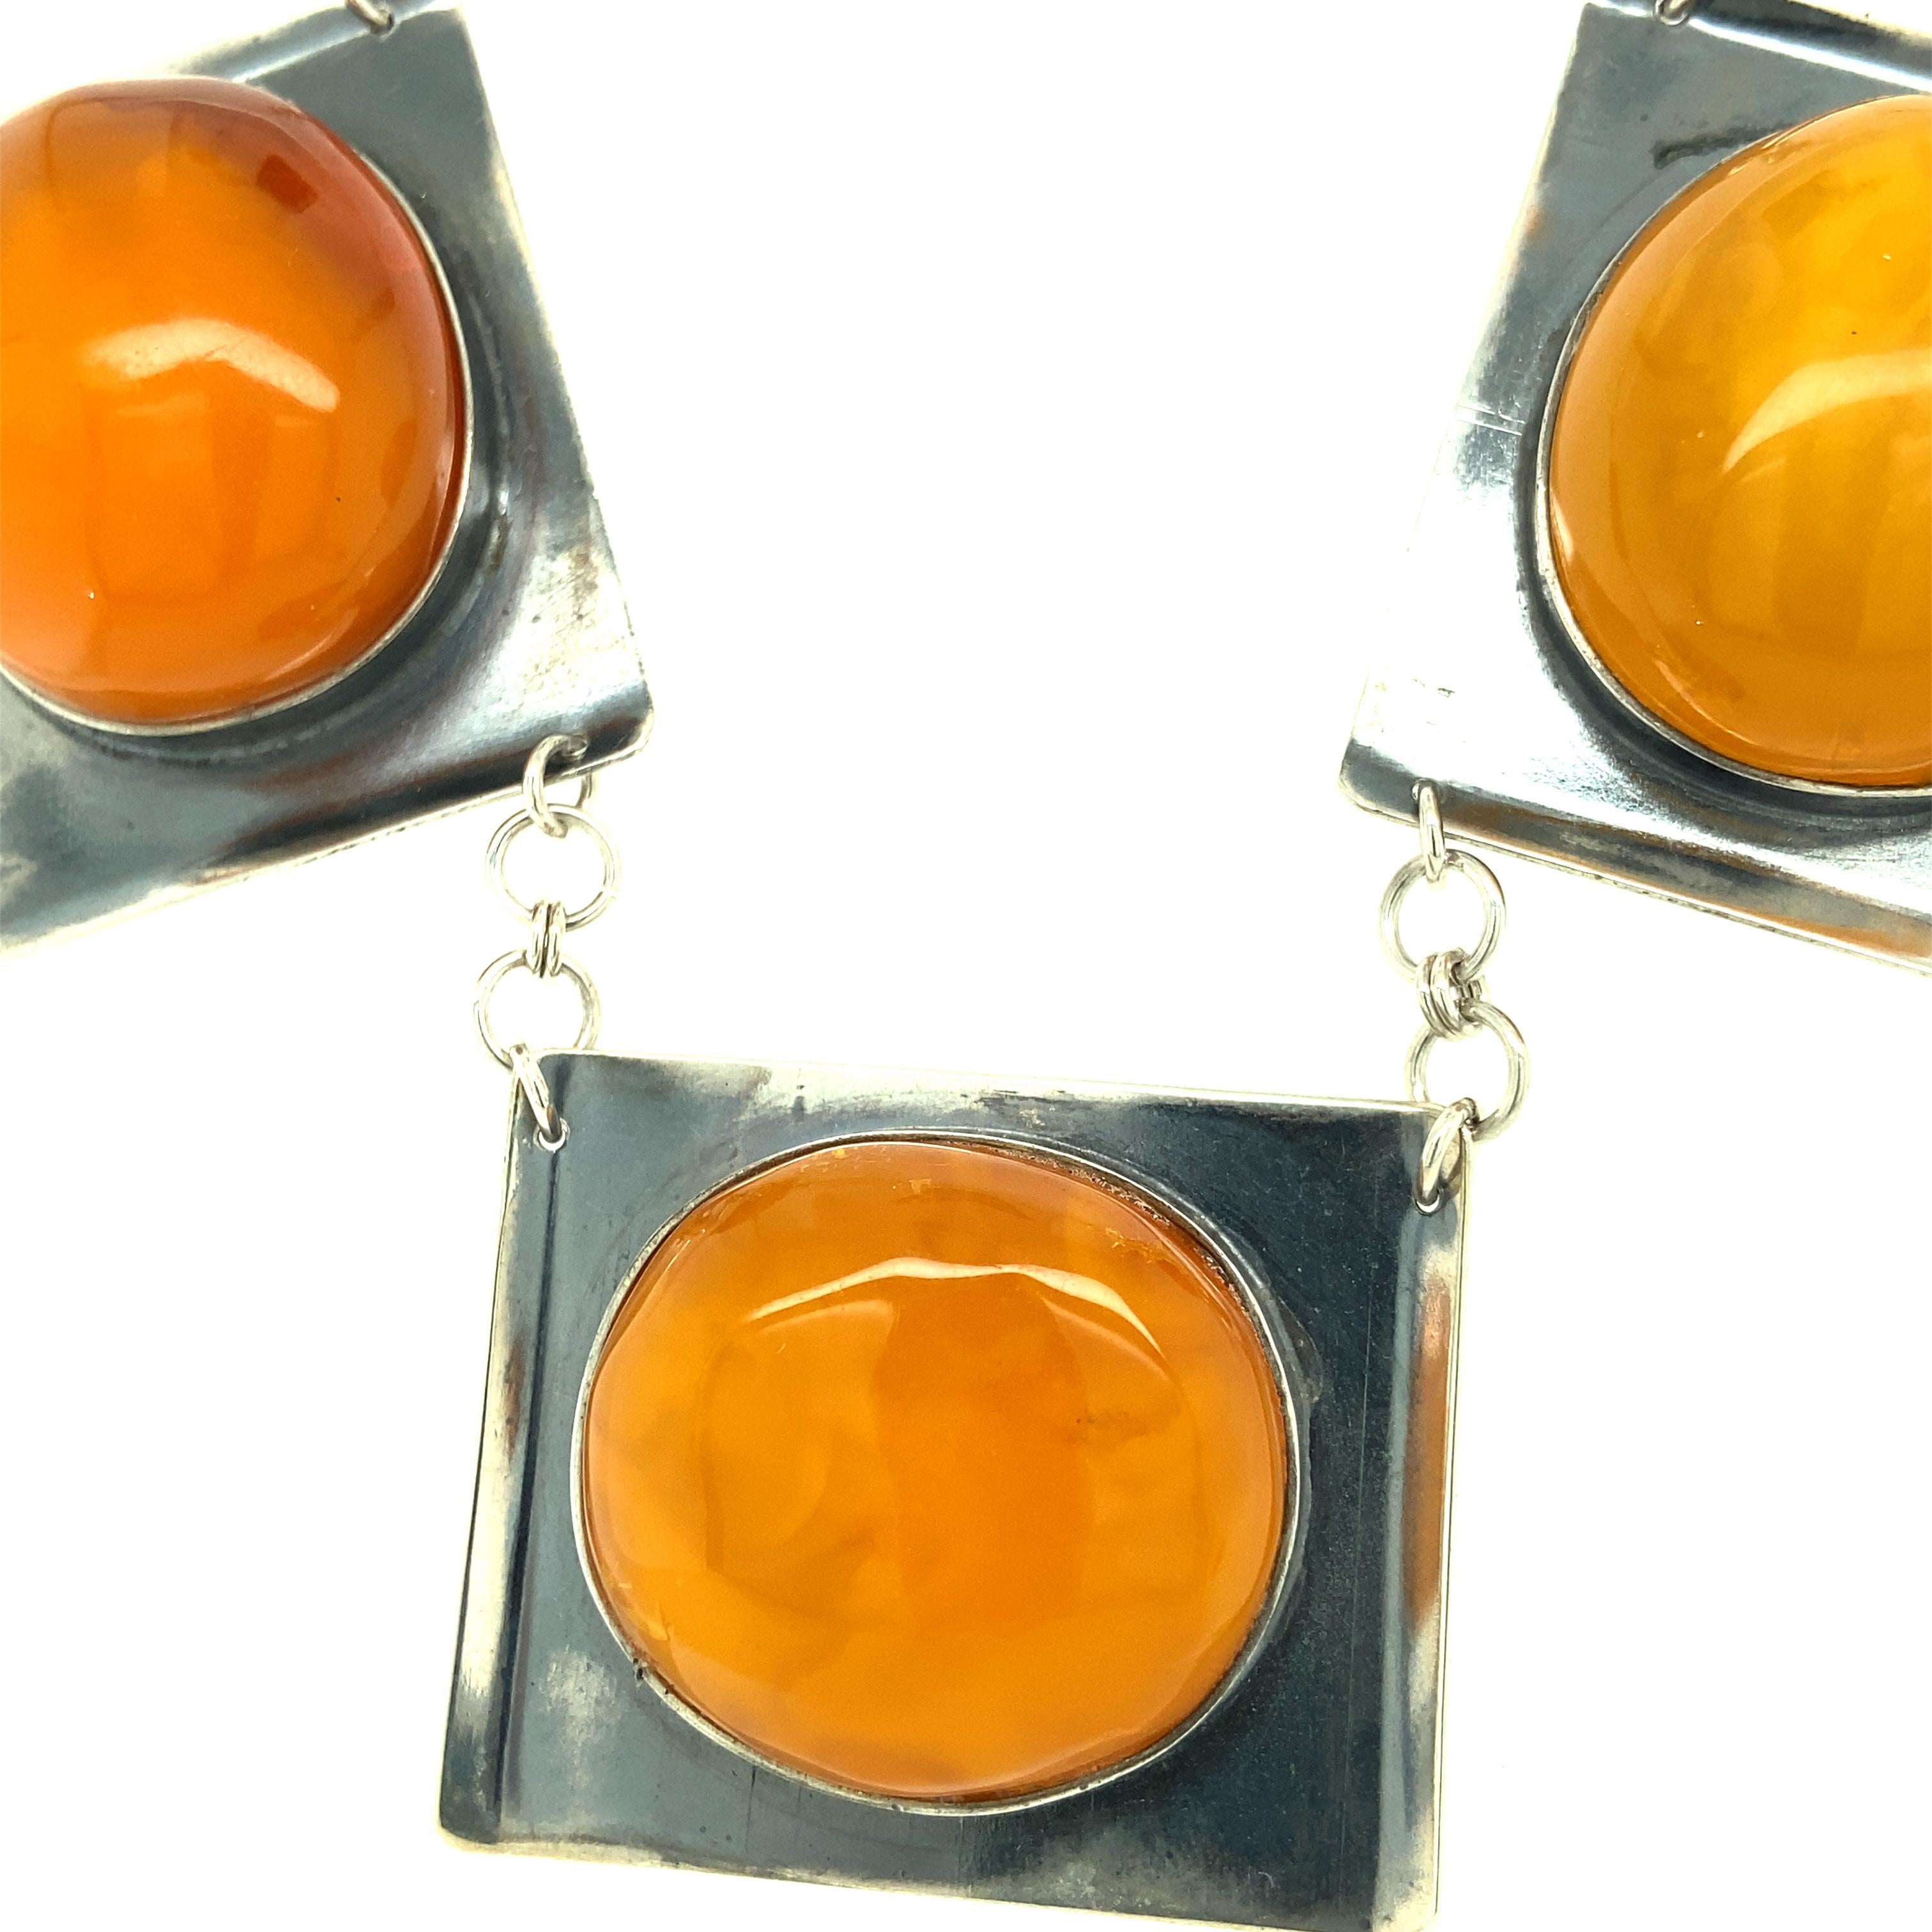 One sterling silver (stamped 875 K8) necklace set with three 25.17x22.18mm cabochon oval amber stones.  The necklace measures 18 inches long and is complete with a hook clasp closure.  